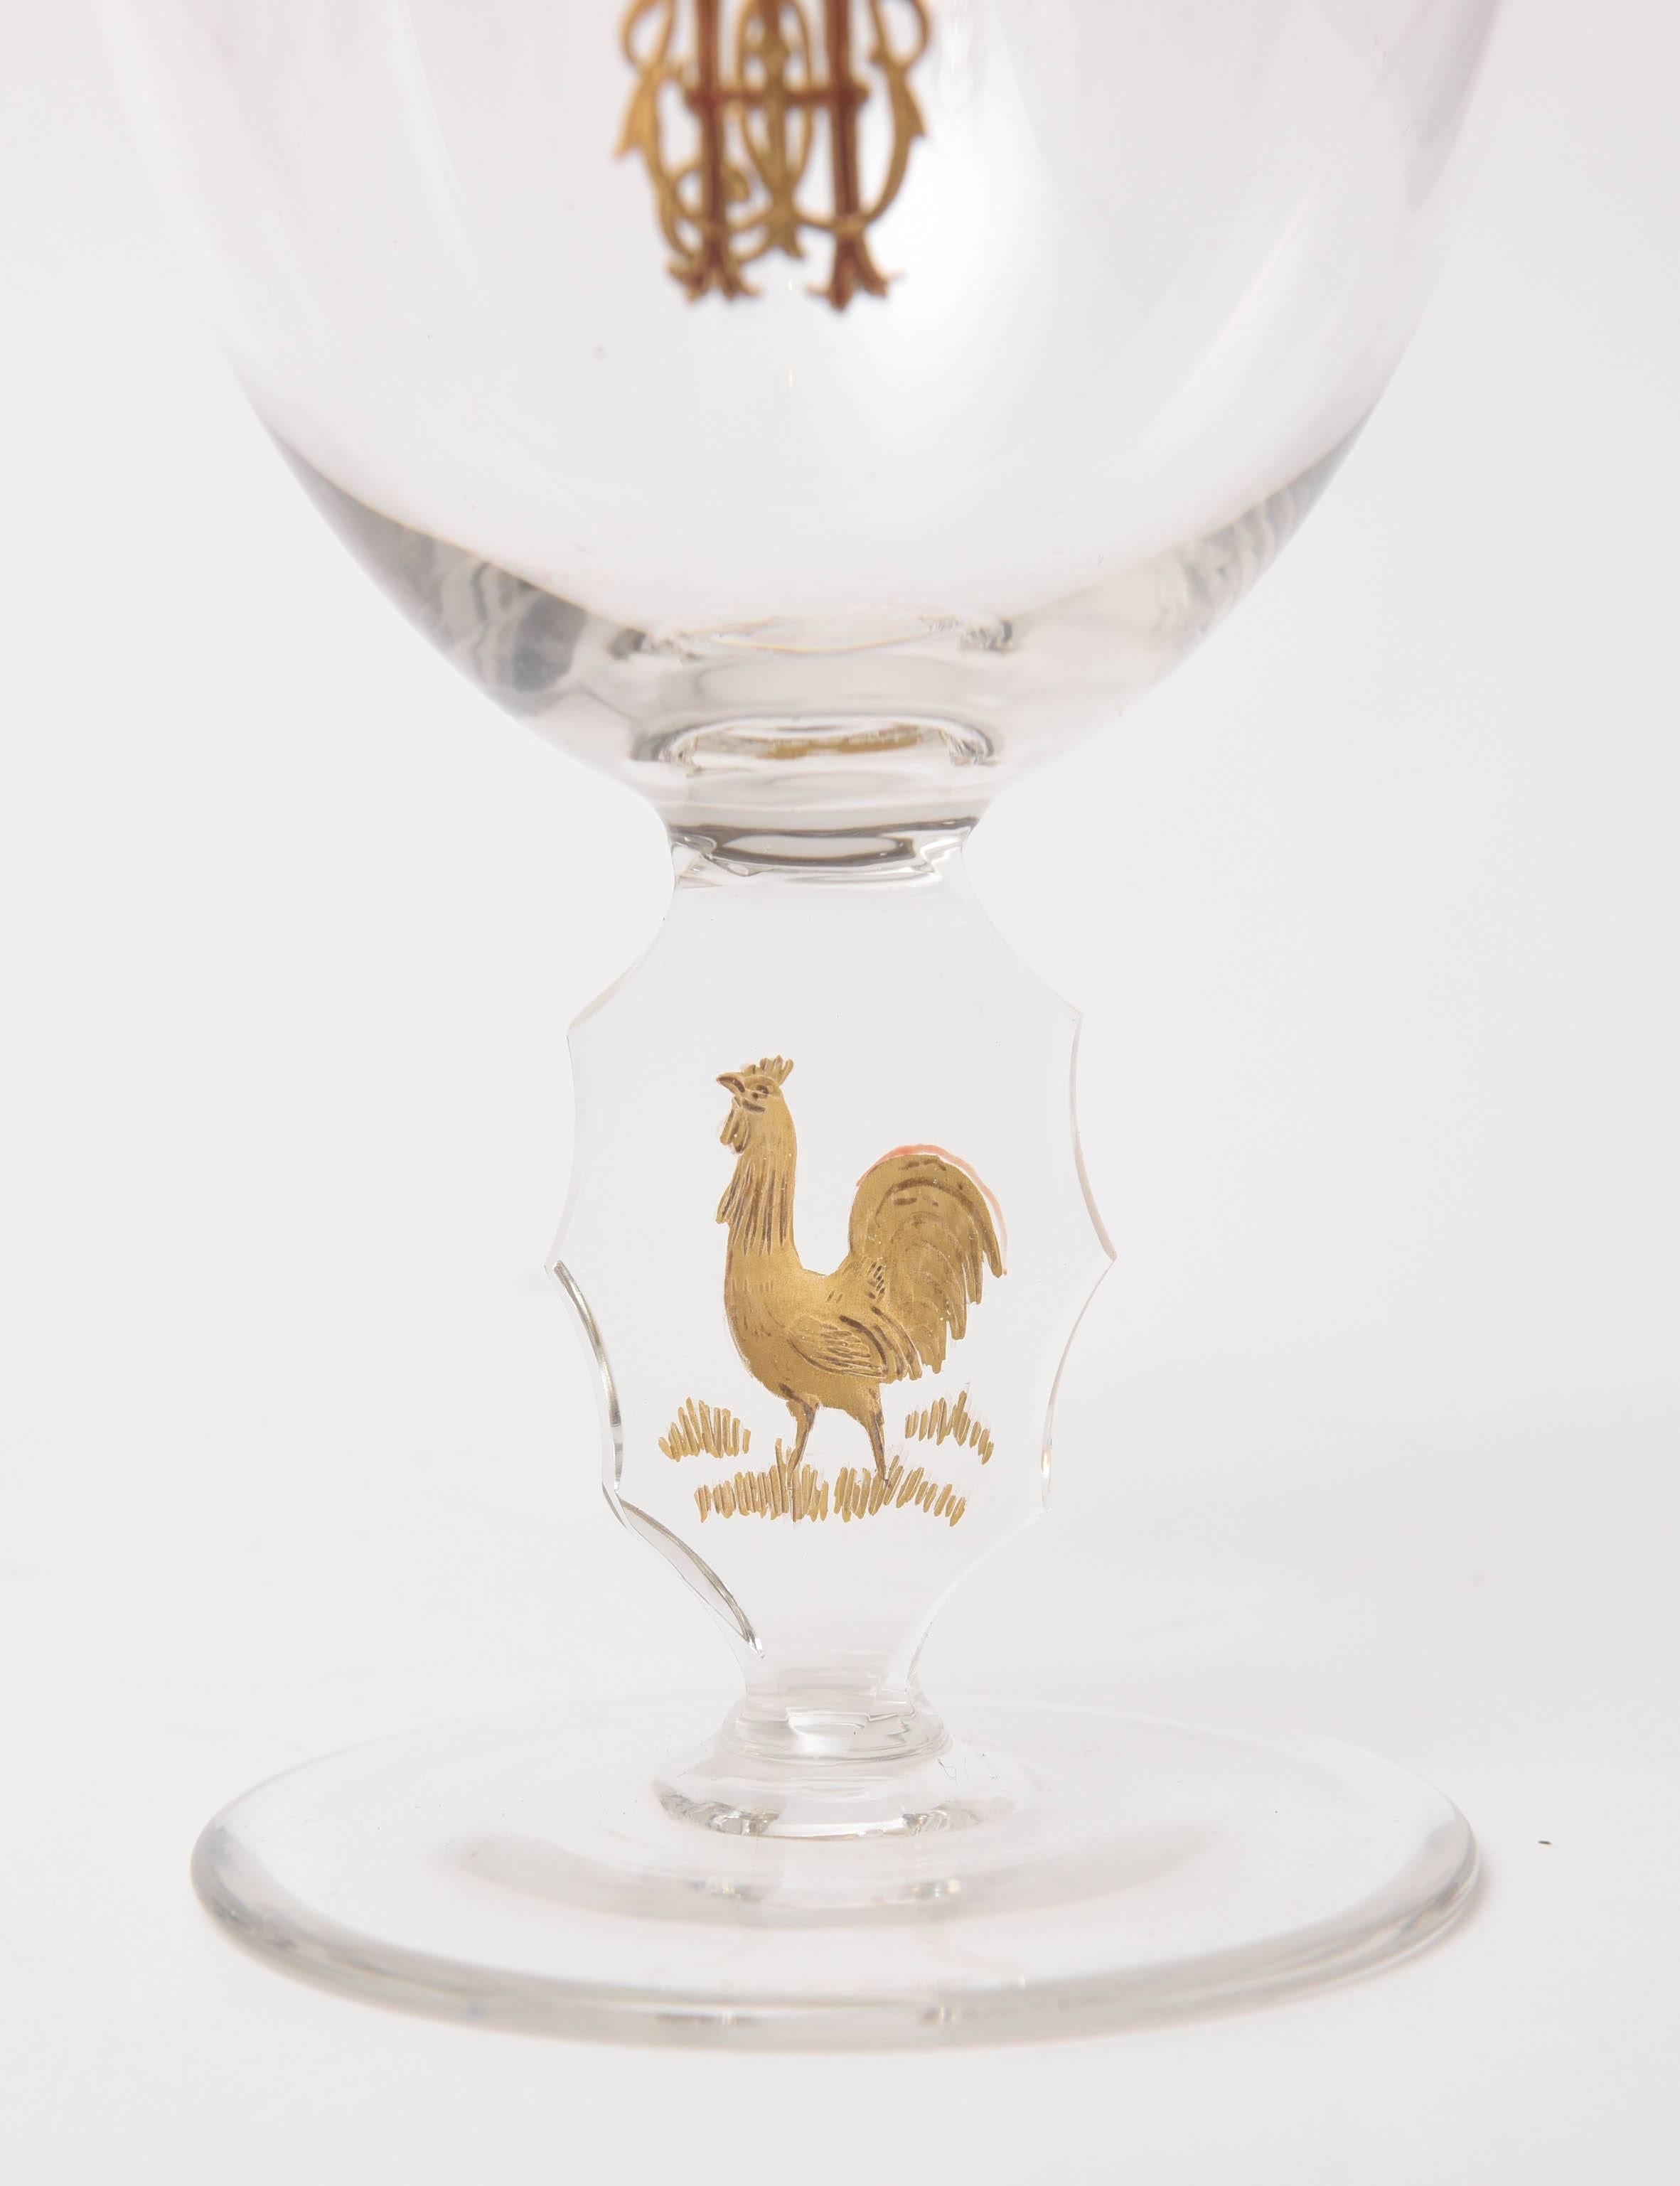 Crystal Set of 15 Cocktail Glasses, Gilded Rooster with Cut Stem and Raised Monogram